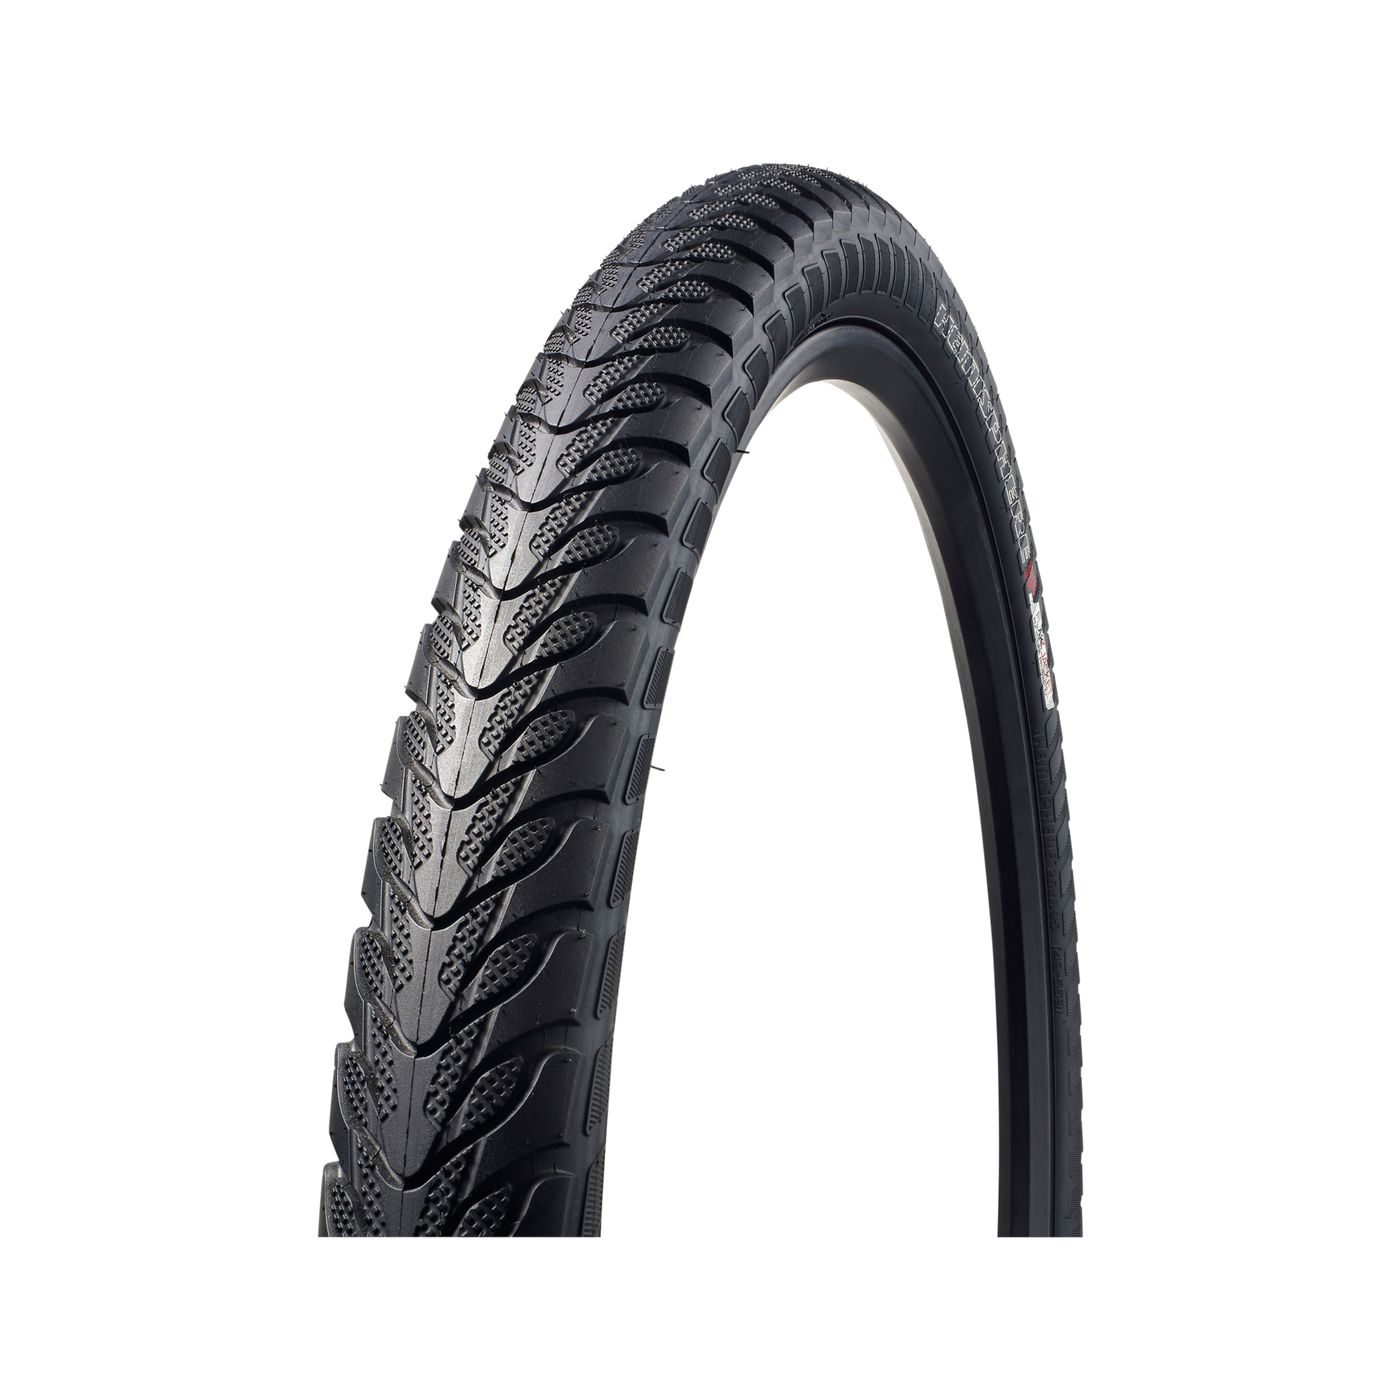 Specialized Hemisphere 26" Bike Tire - Tires - Bicycle Warehouse